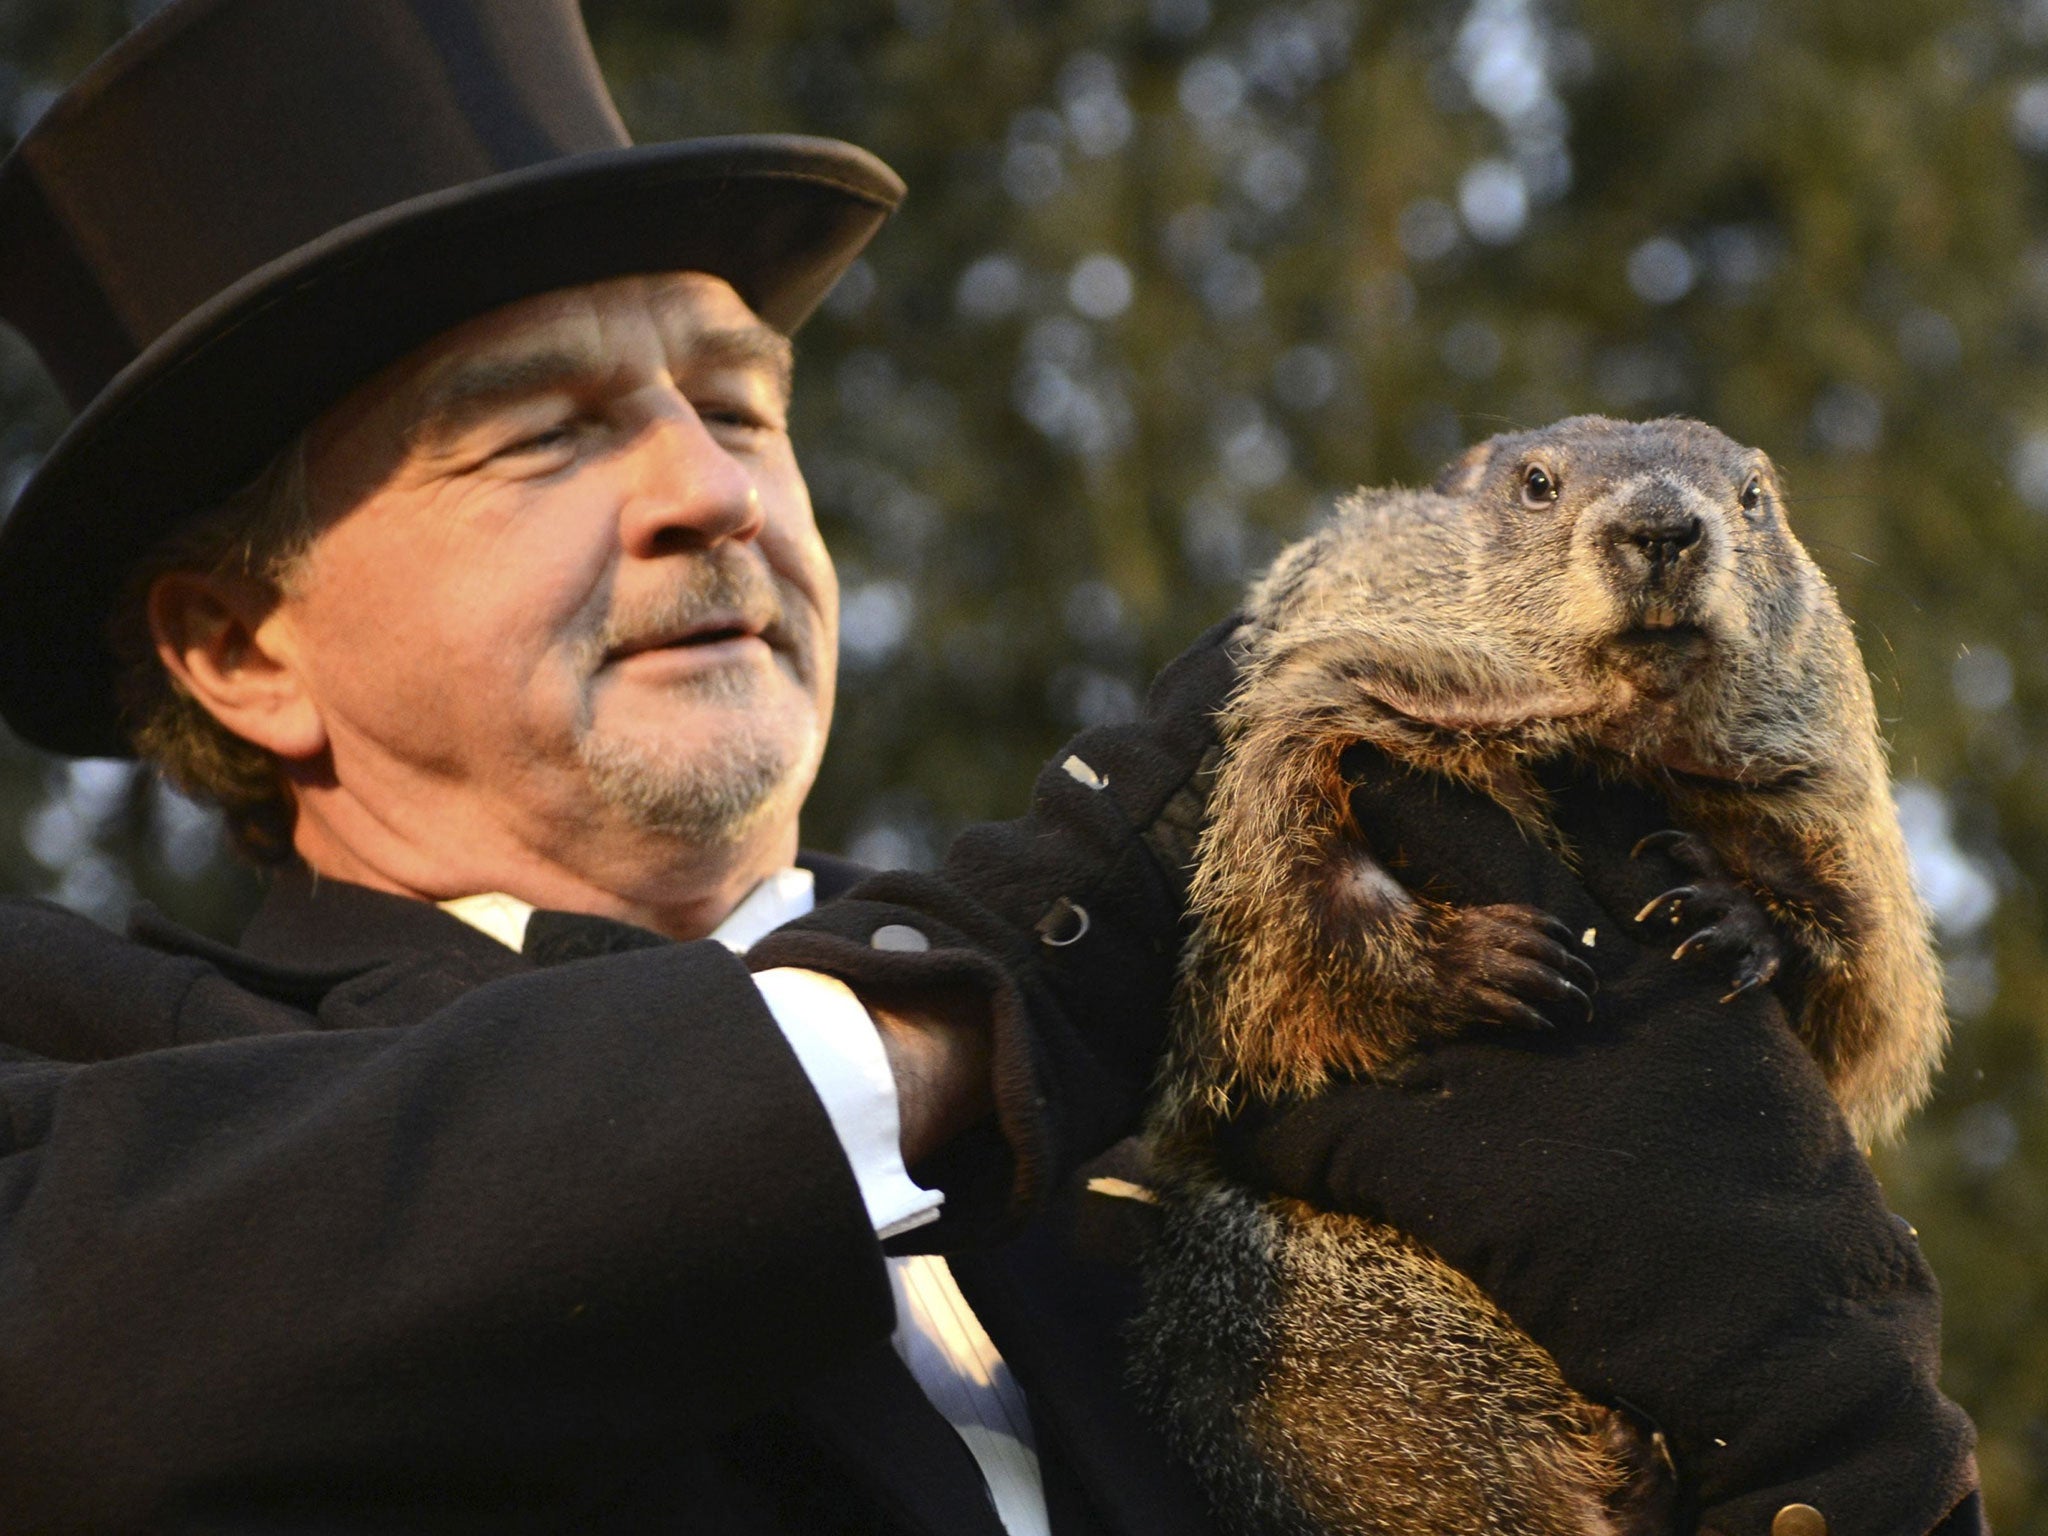 Groundhog co-handler John Griffiths holds up groundhog Punxsutawney Phil after Phil's annual weather prediction on Gobbler's Knob on the 130th Groundhog Day in Punxsutawney, Pennsylvania February 2, 2016